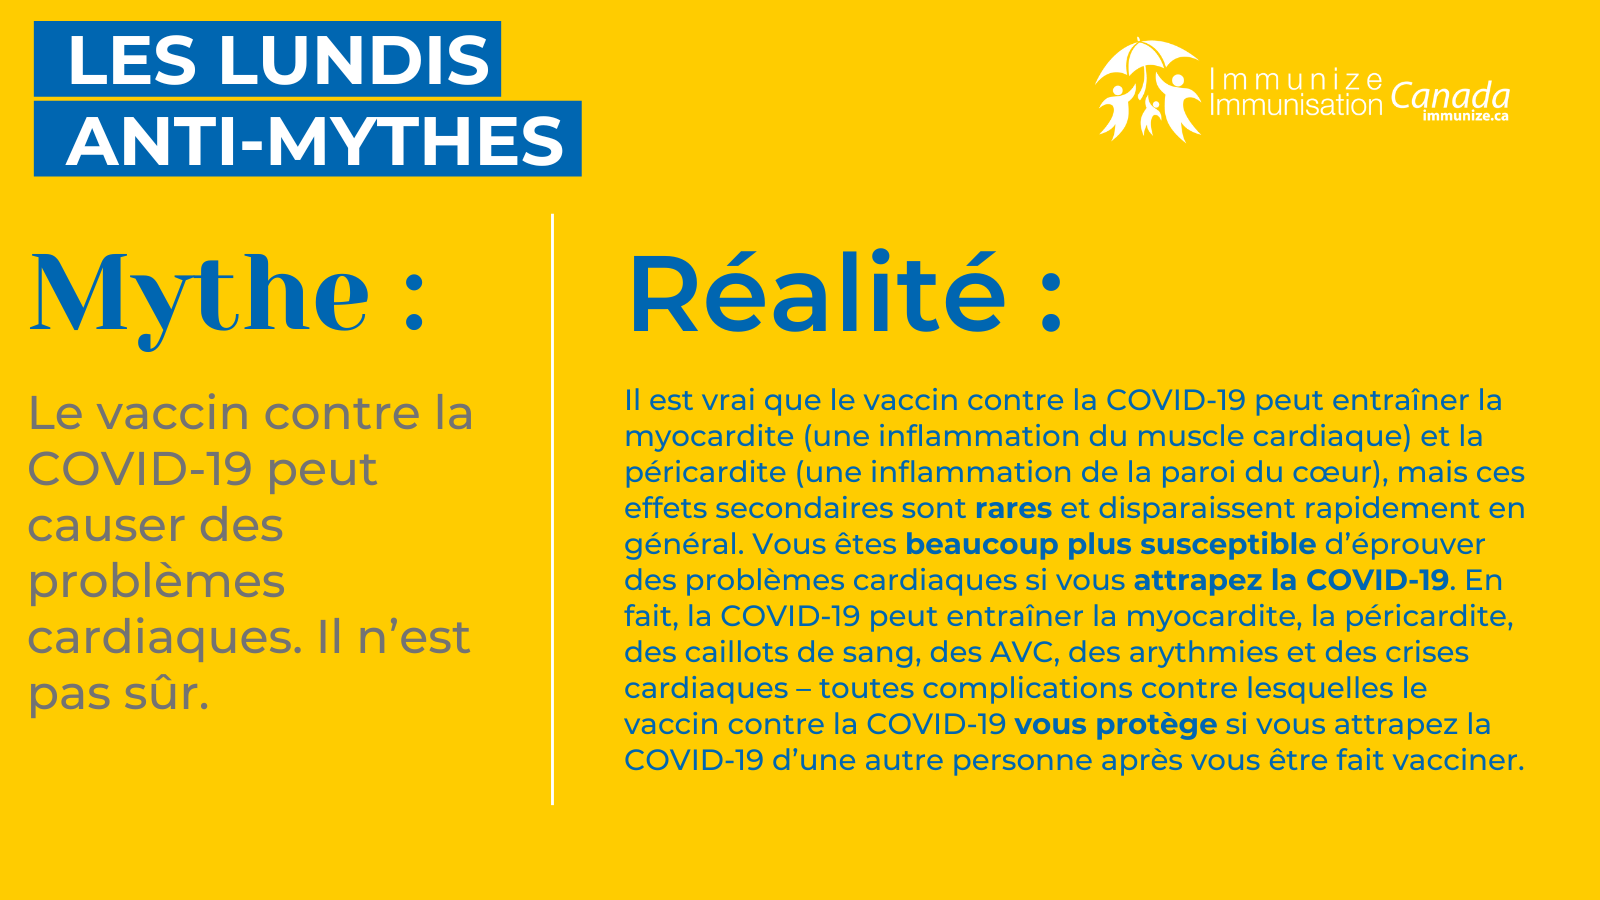 Les lundis anti-mythes - COVID-19 - image 14 pour Twitter/X